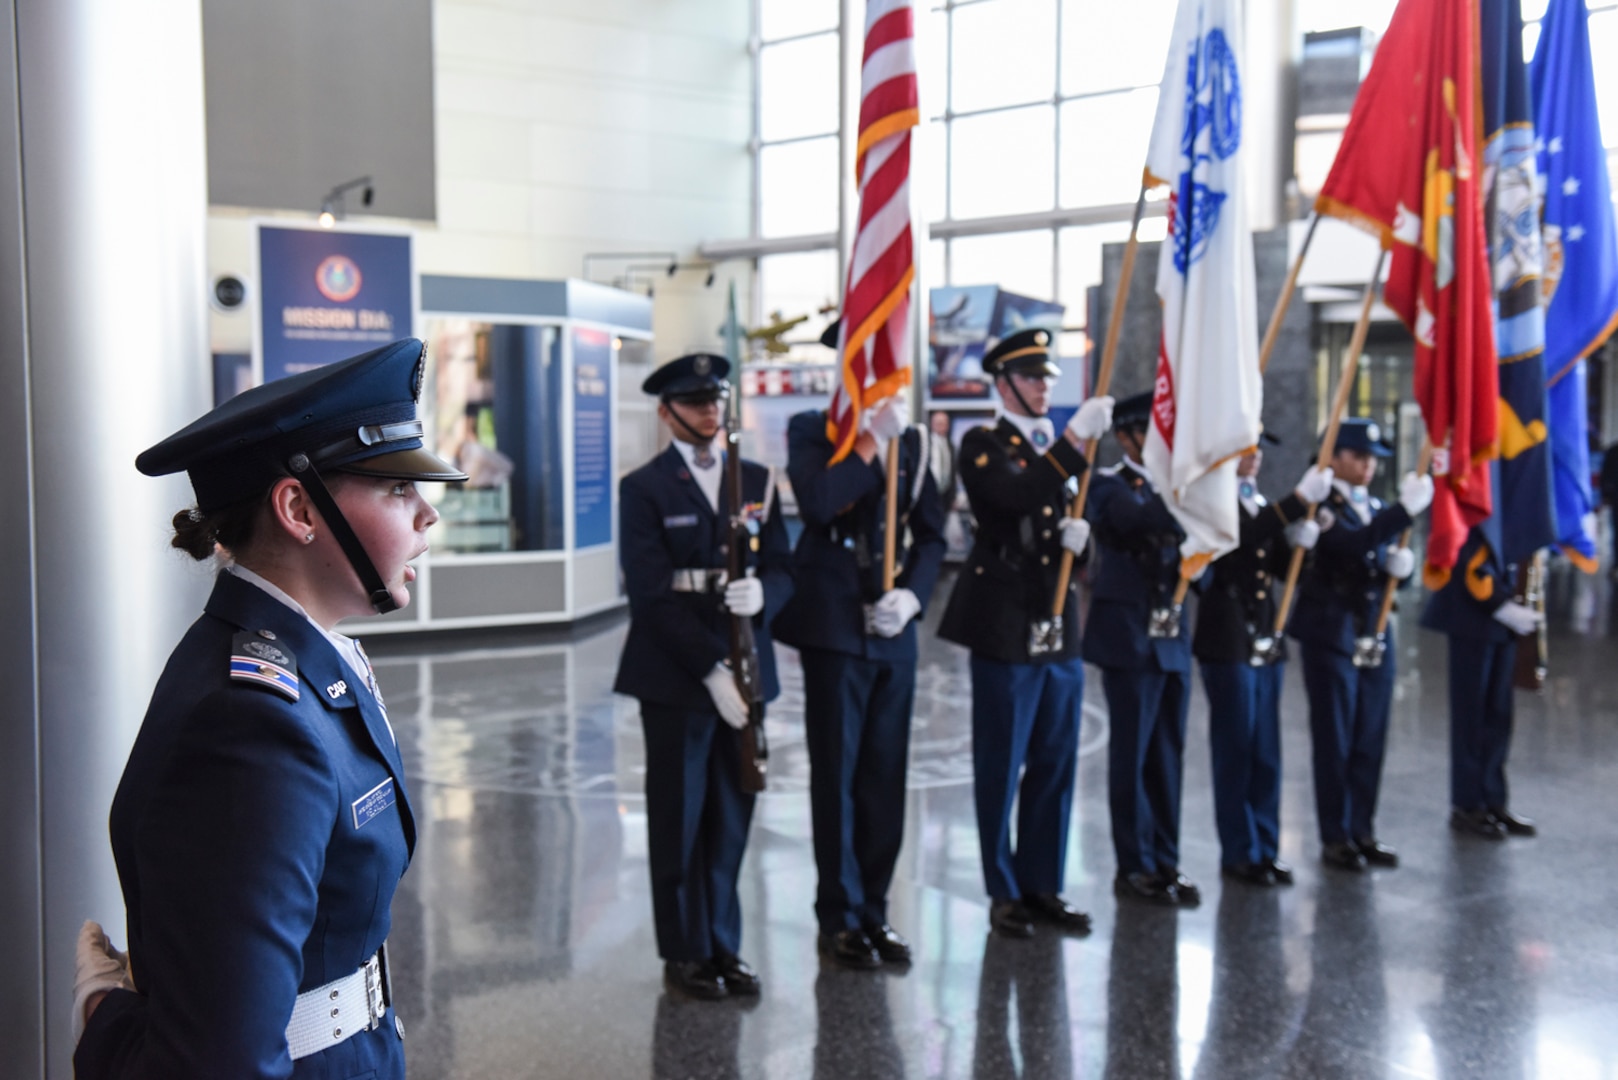 Cadet 2nd Lt. Michaela Melancon, of the Civil Air Patrol’s National Capital Wing, sings the national anthem during a joint color guard performance at DIA Headquarters, Oct. 10.